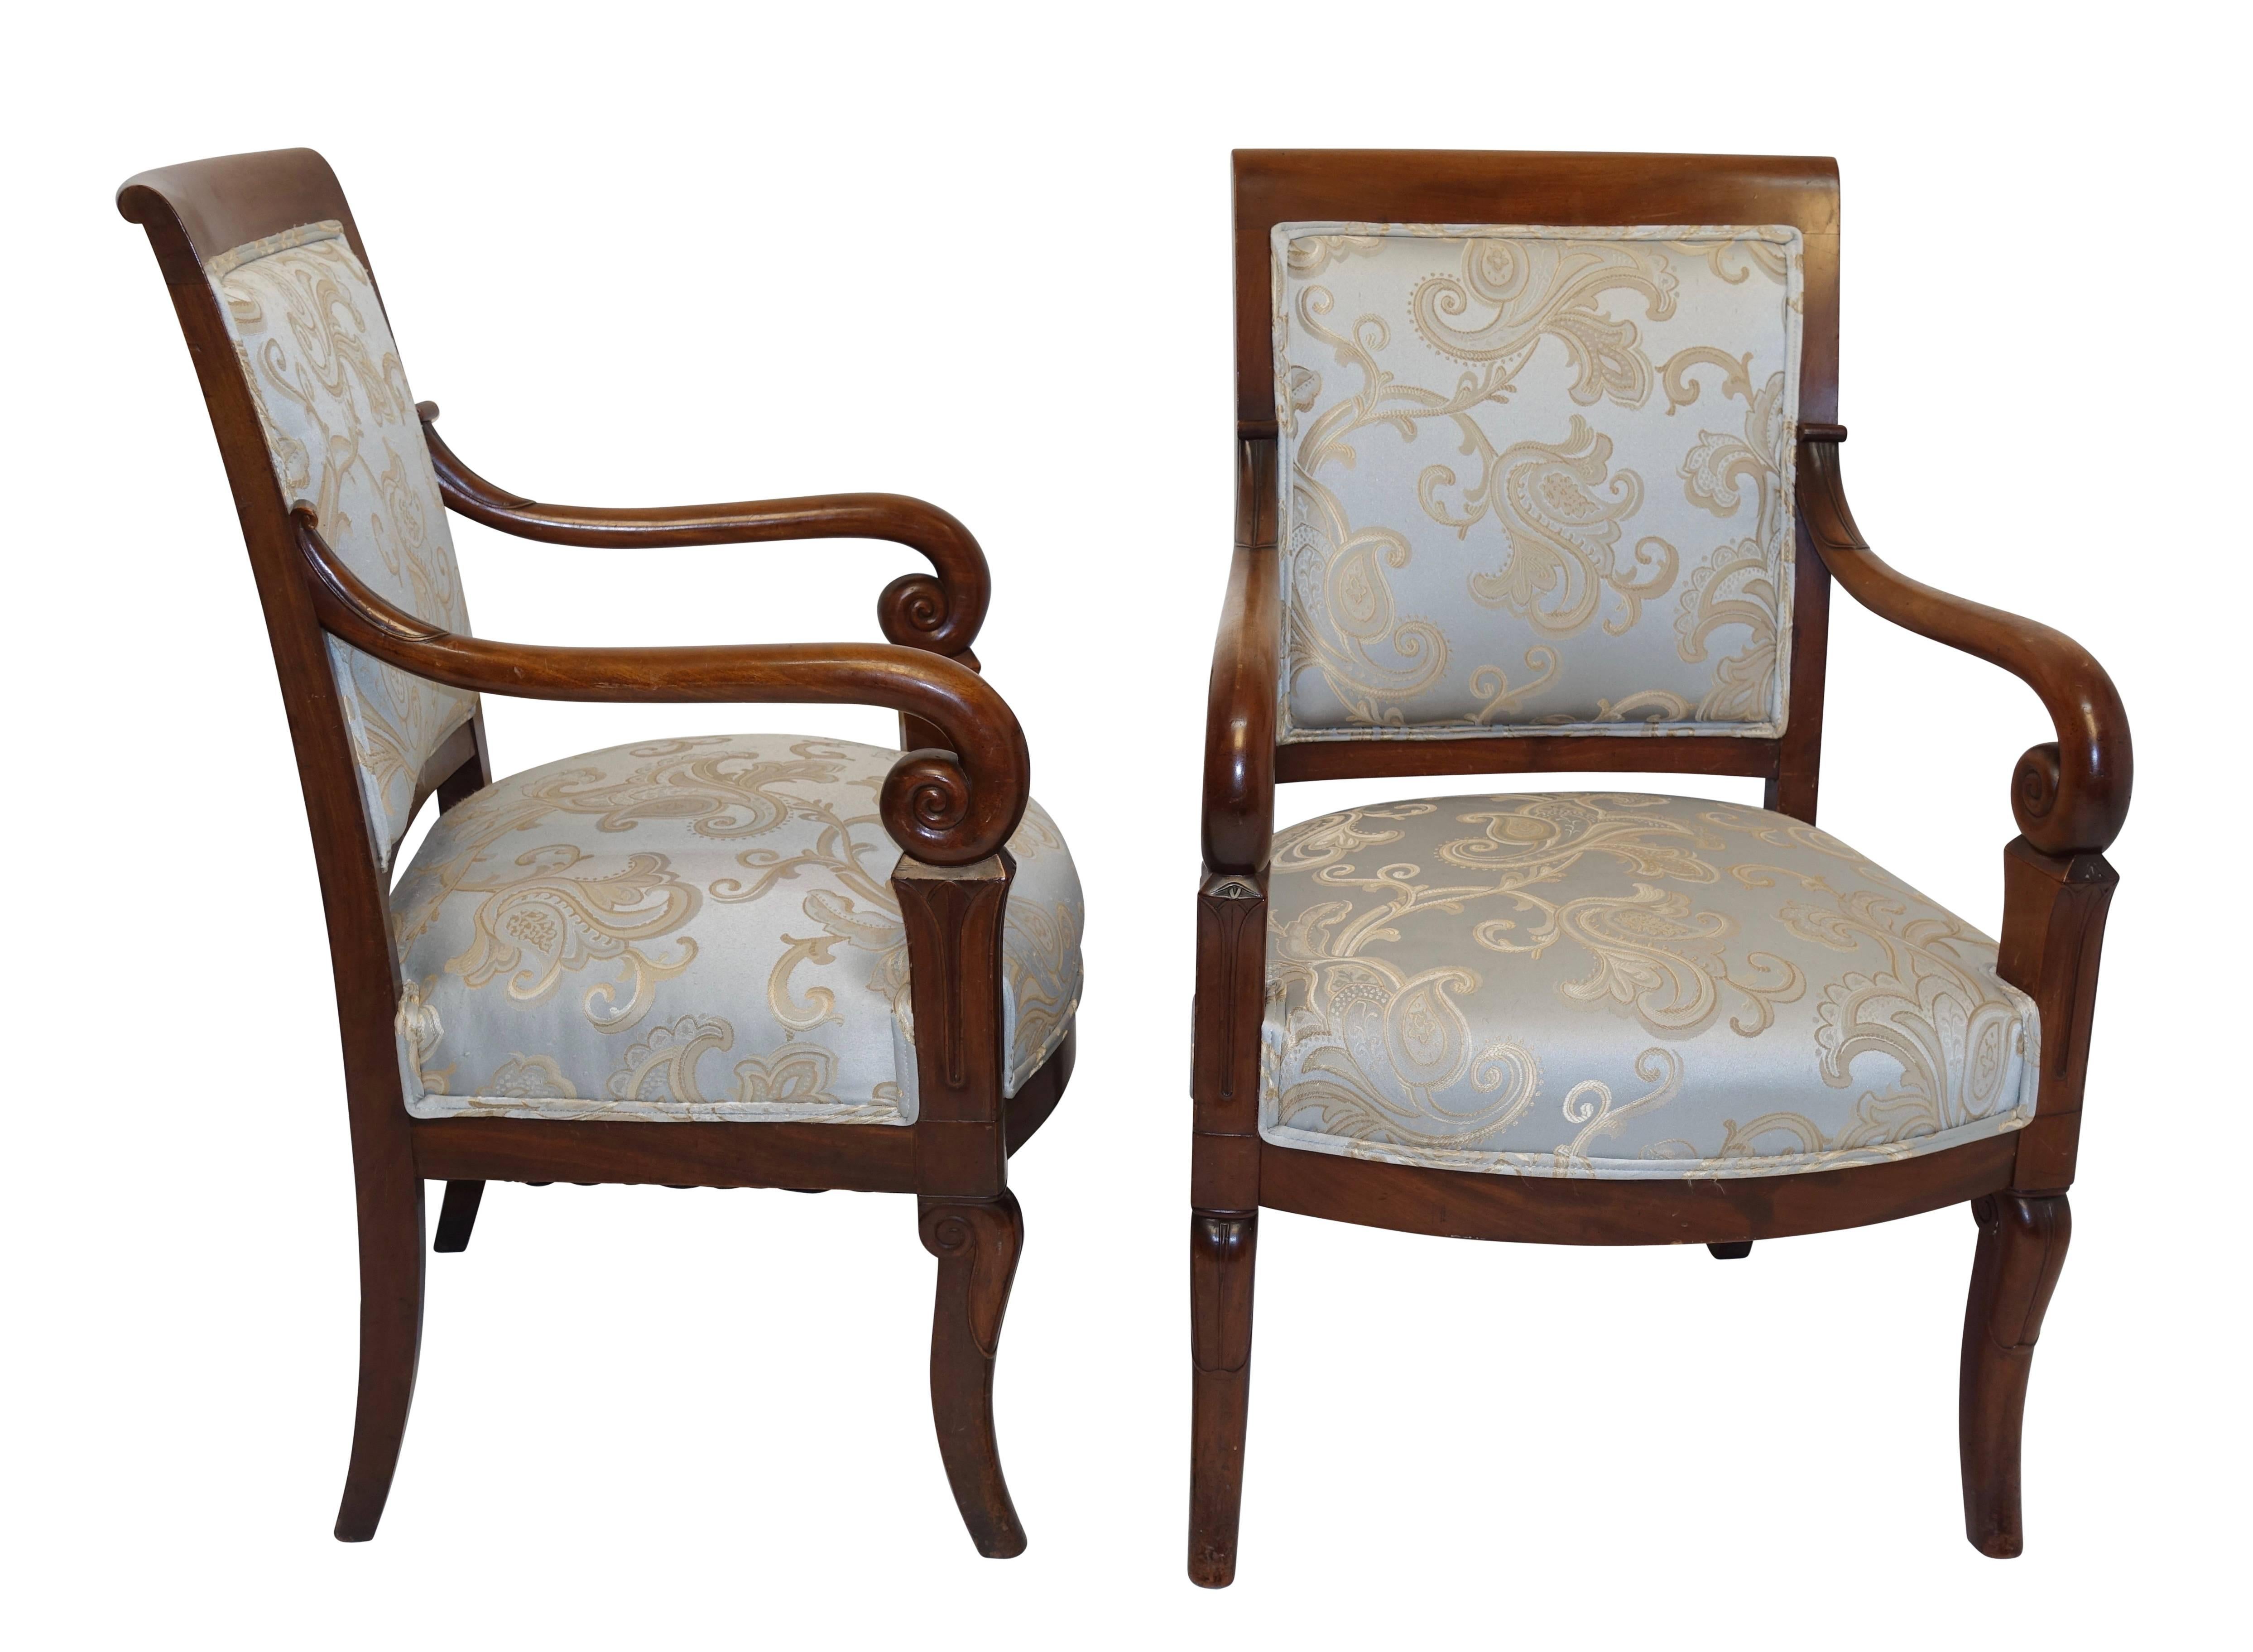 A pair of Charles X walnut fauteuils armchairs with sweeping and curled arms and saber style front legs. Upholstery in as found condition.
France, circa 1830.